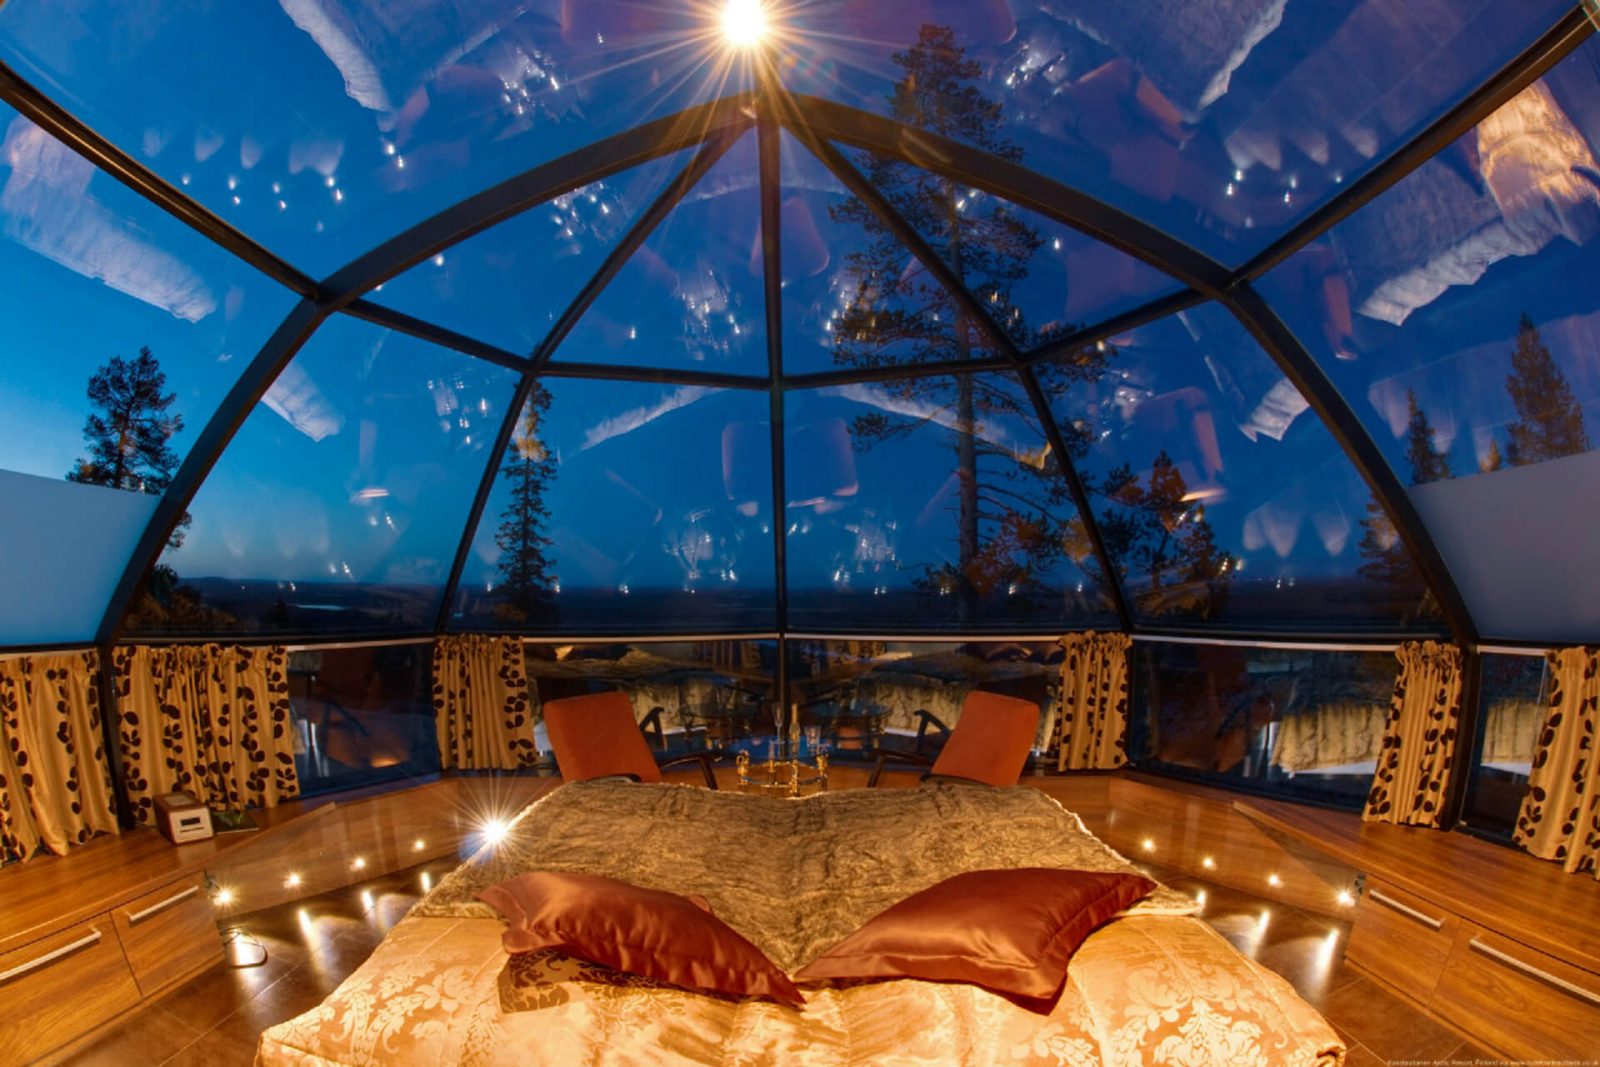 This Travel Quiz Is Scientifically Designed to Determine the Time Period You Belong in Lapland, Finland glass igloo hotel